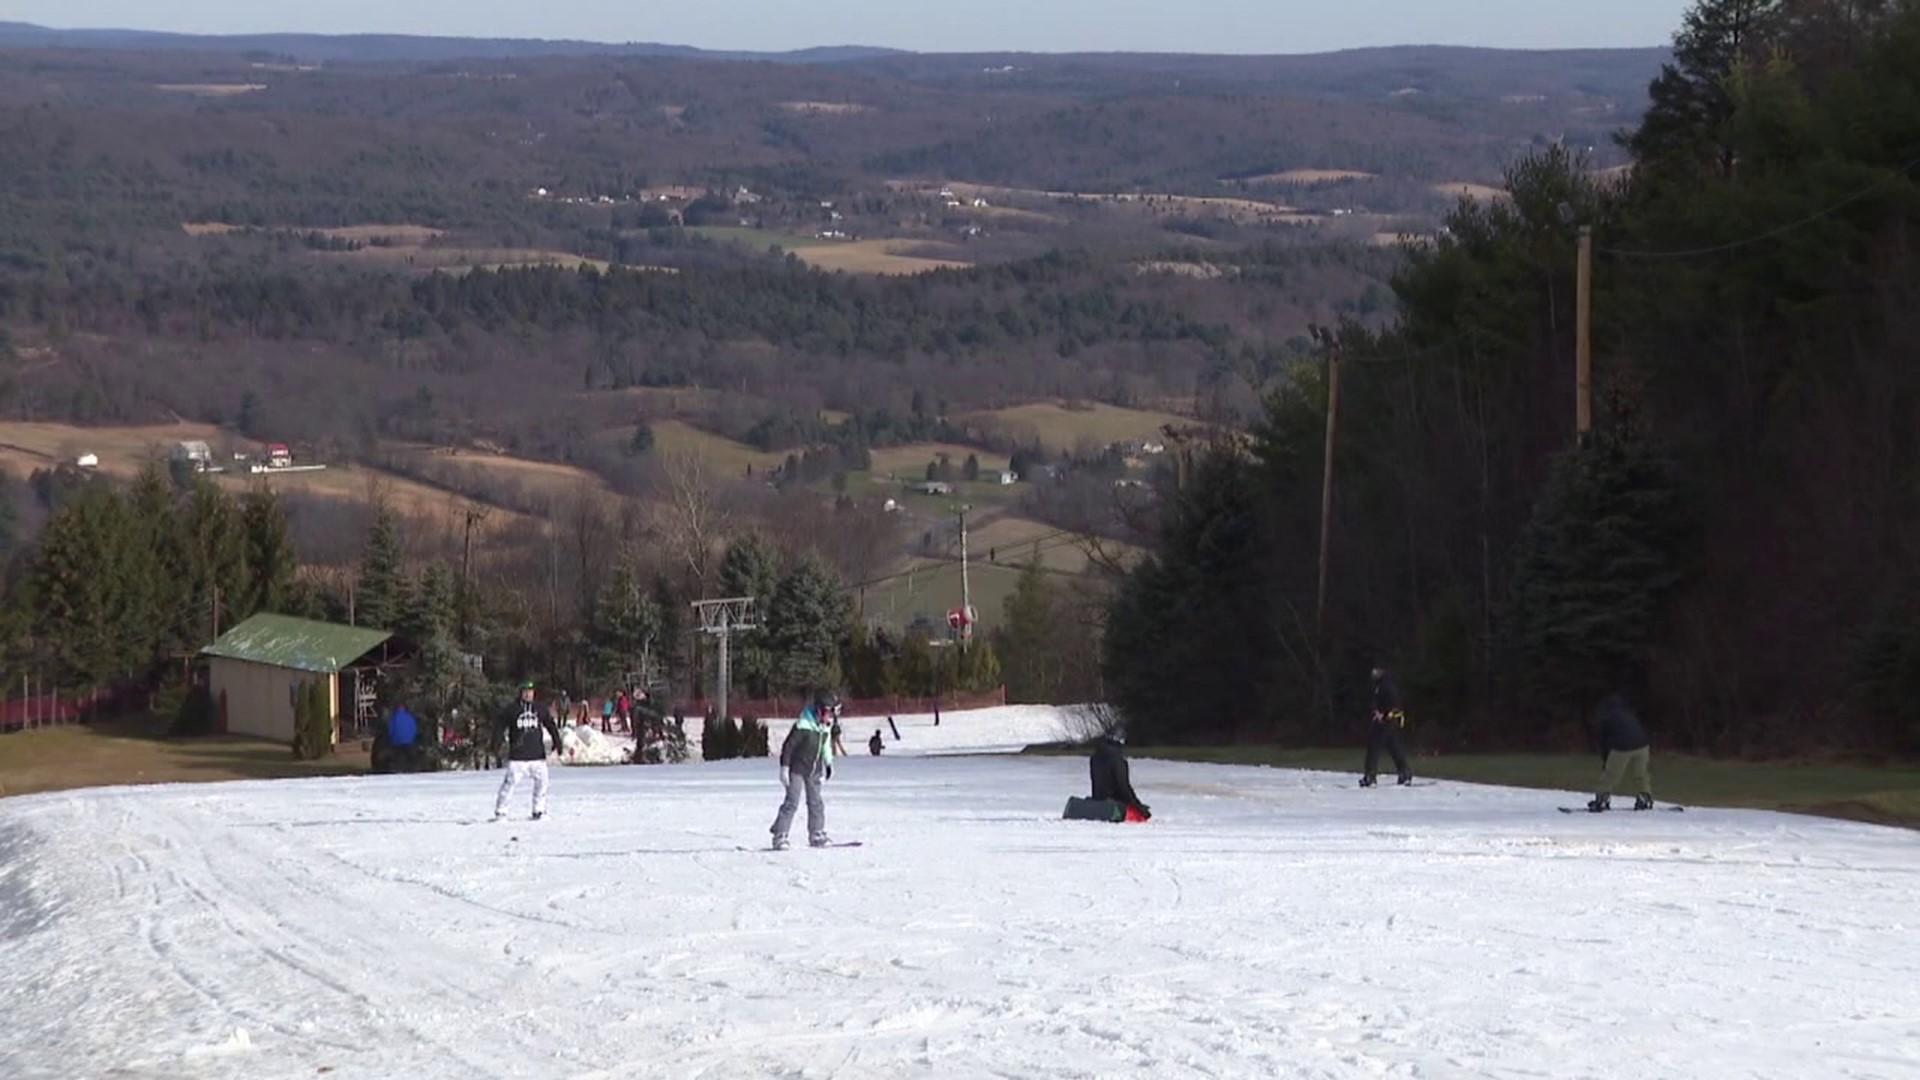 Just a week after temperatures approached the 60s, Blue Mountain Resort is now covered with fresh fallen snow.